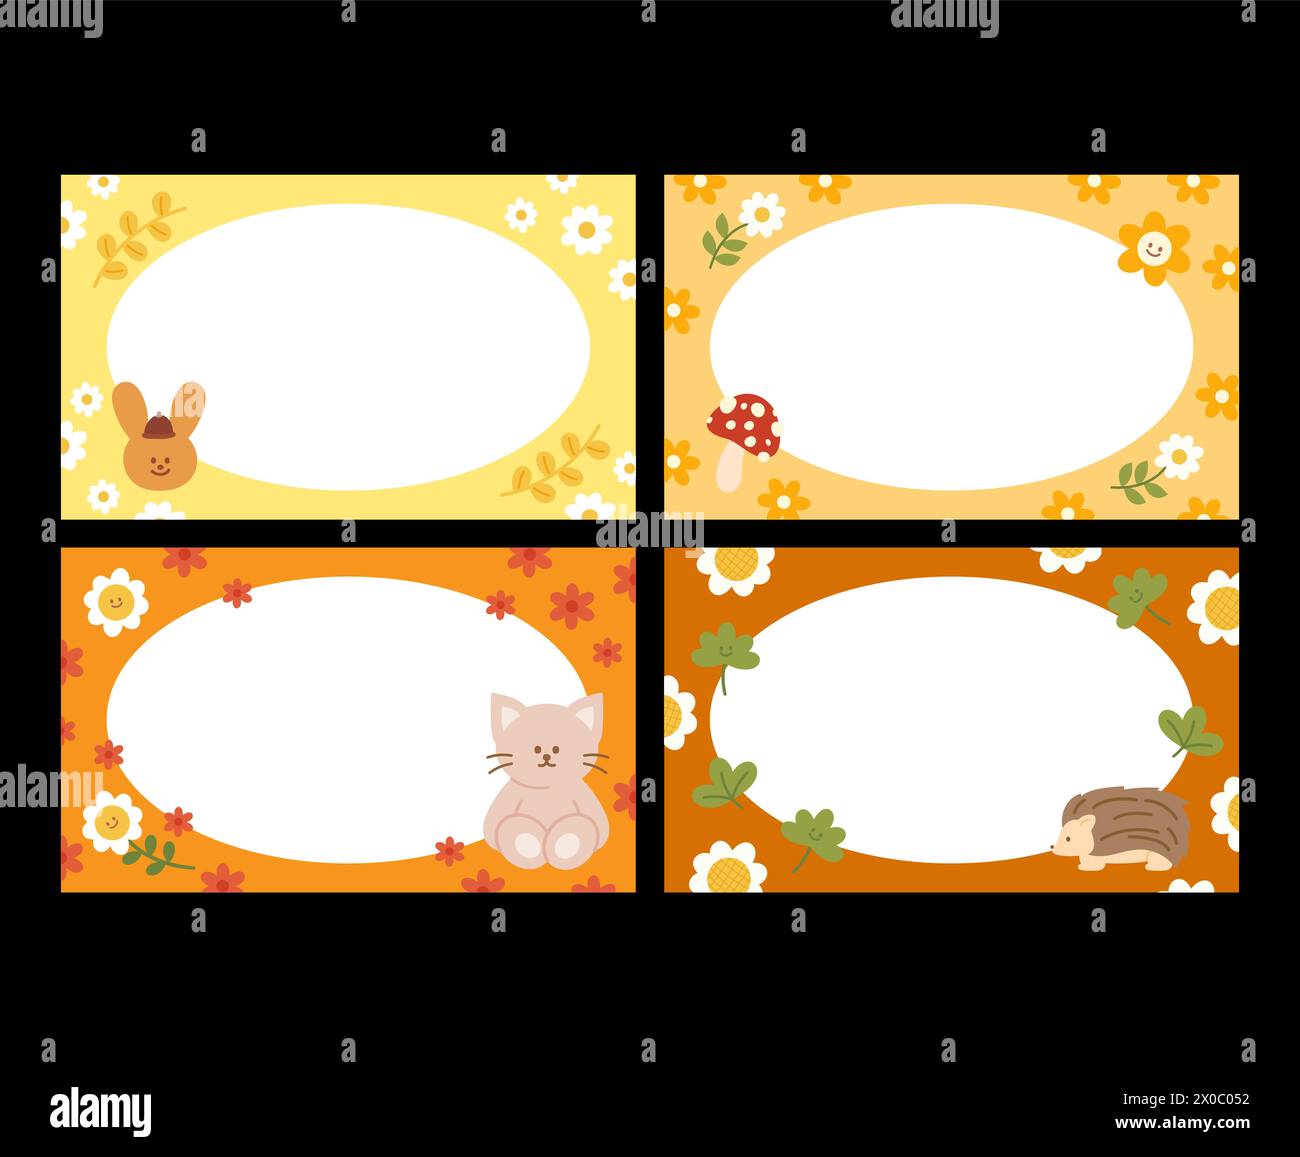 Autumn rectangle frame with autumn flowers, leaves, cat, hedgehog, mushroom, bunny for banner, ad template, business, name tags, marketing, background Stock Vector